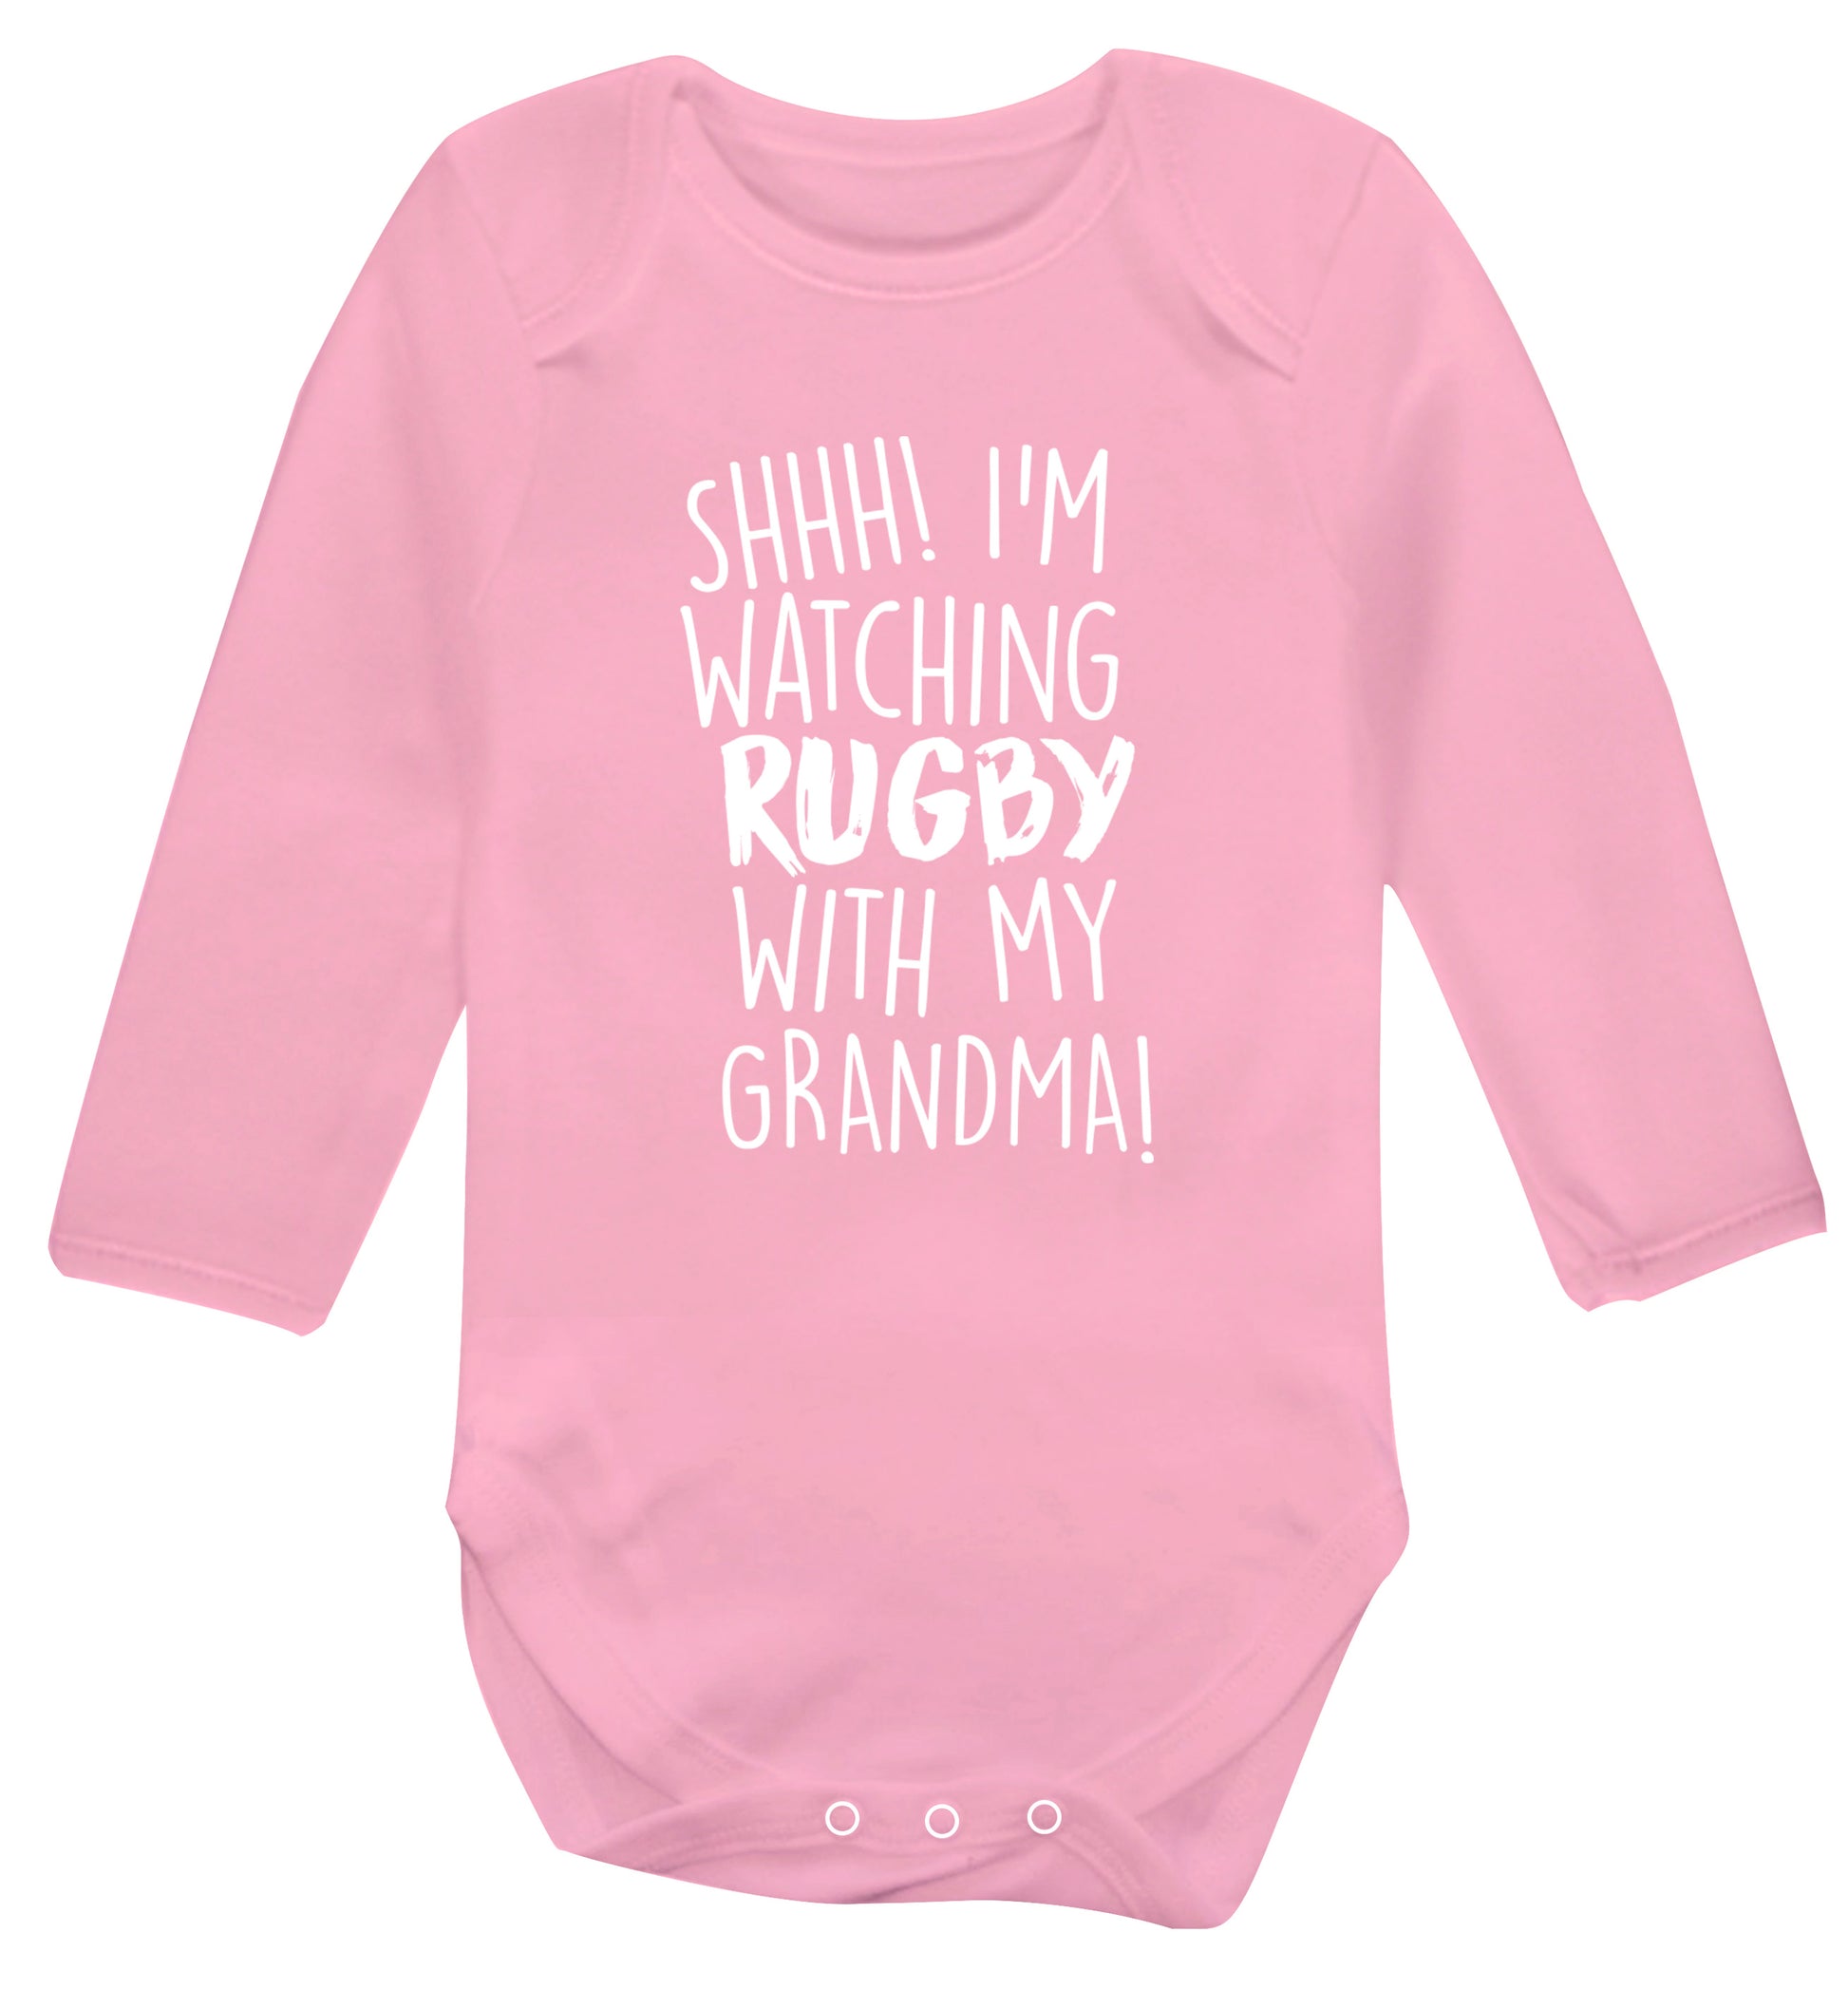 Shh I'm watching rugby with my grandma Baby Vest long sleeved pale pink 6-12 months